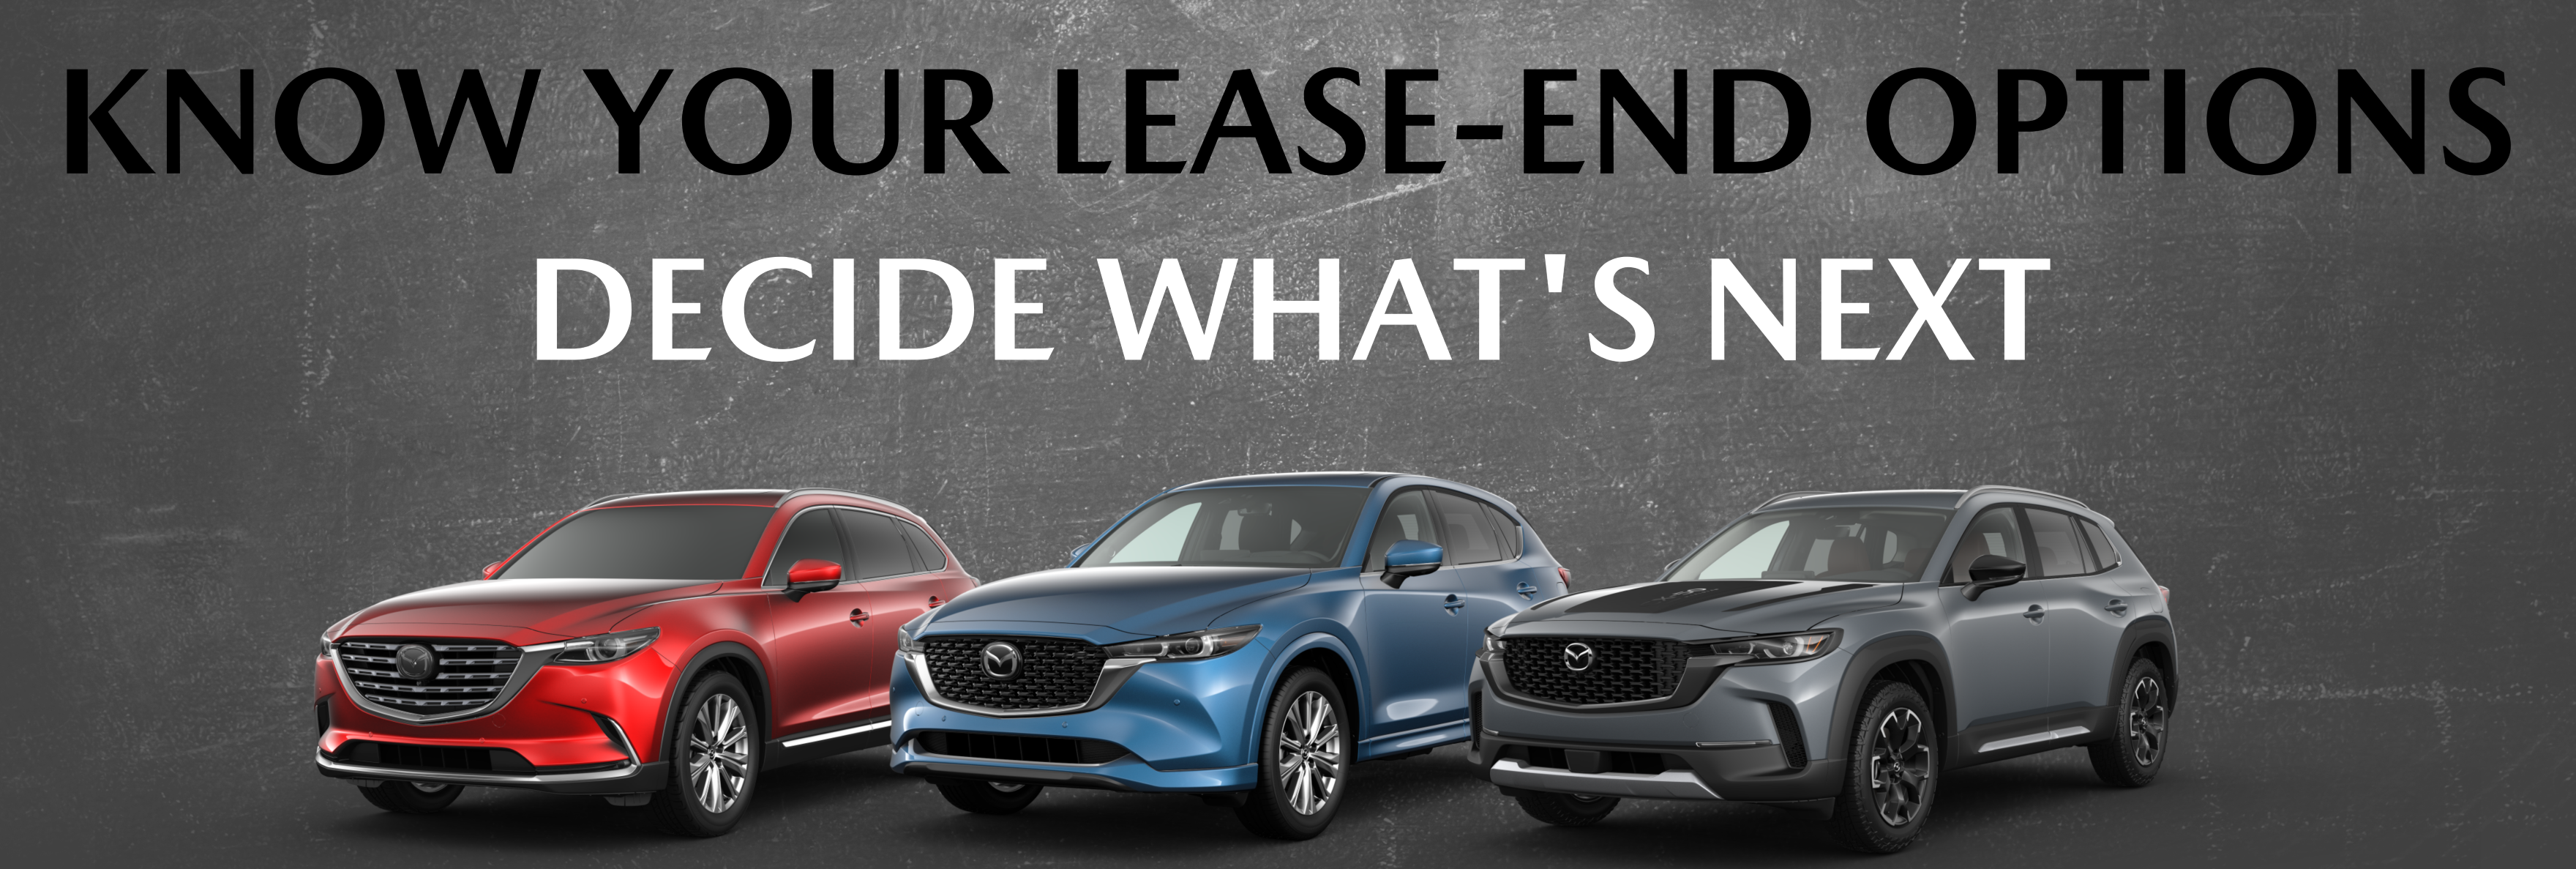 Know Your Lease End Options at Acadiana Mazda in Lafayette LA